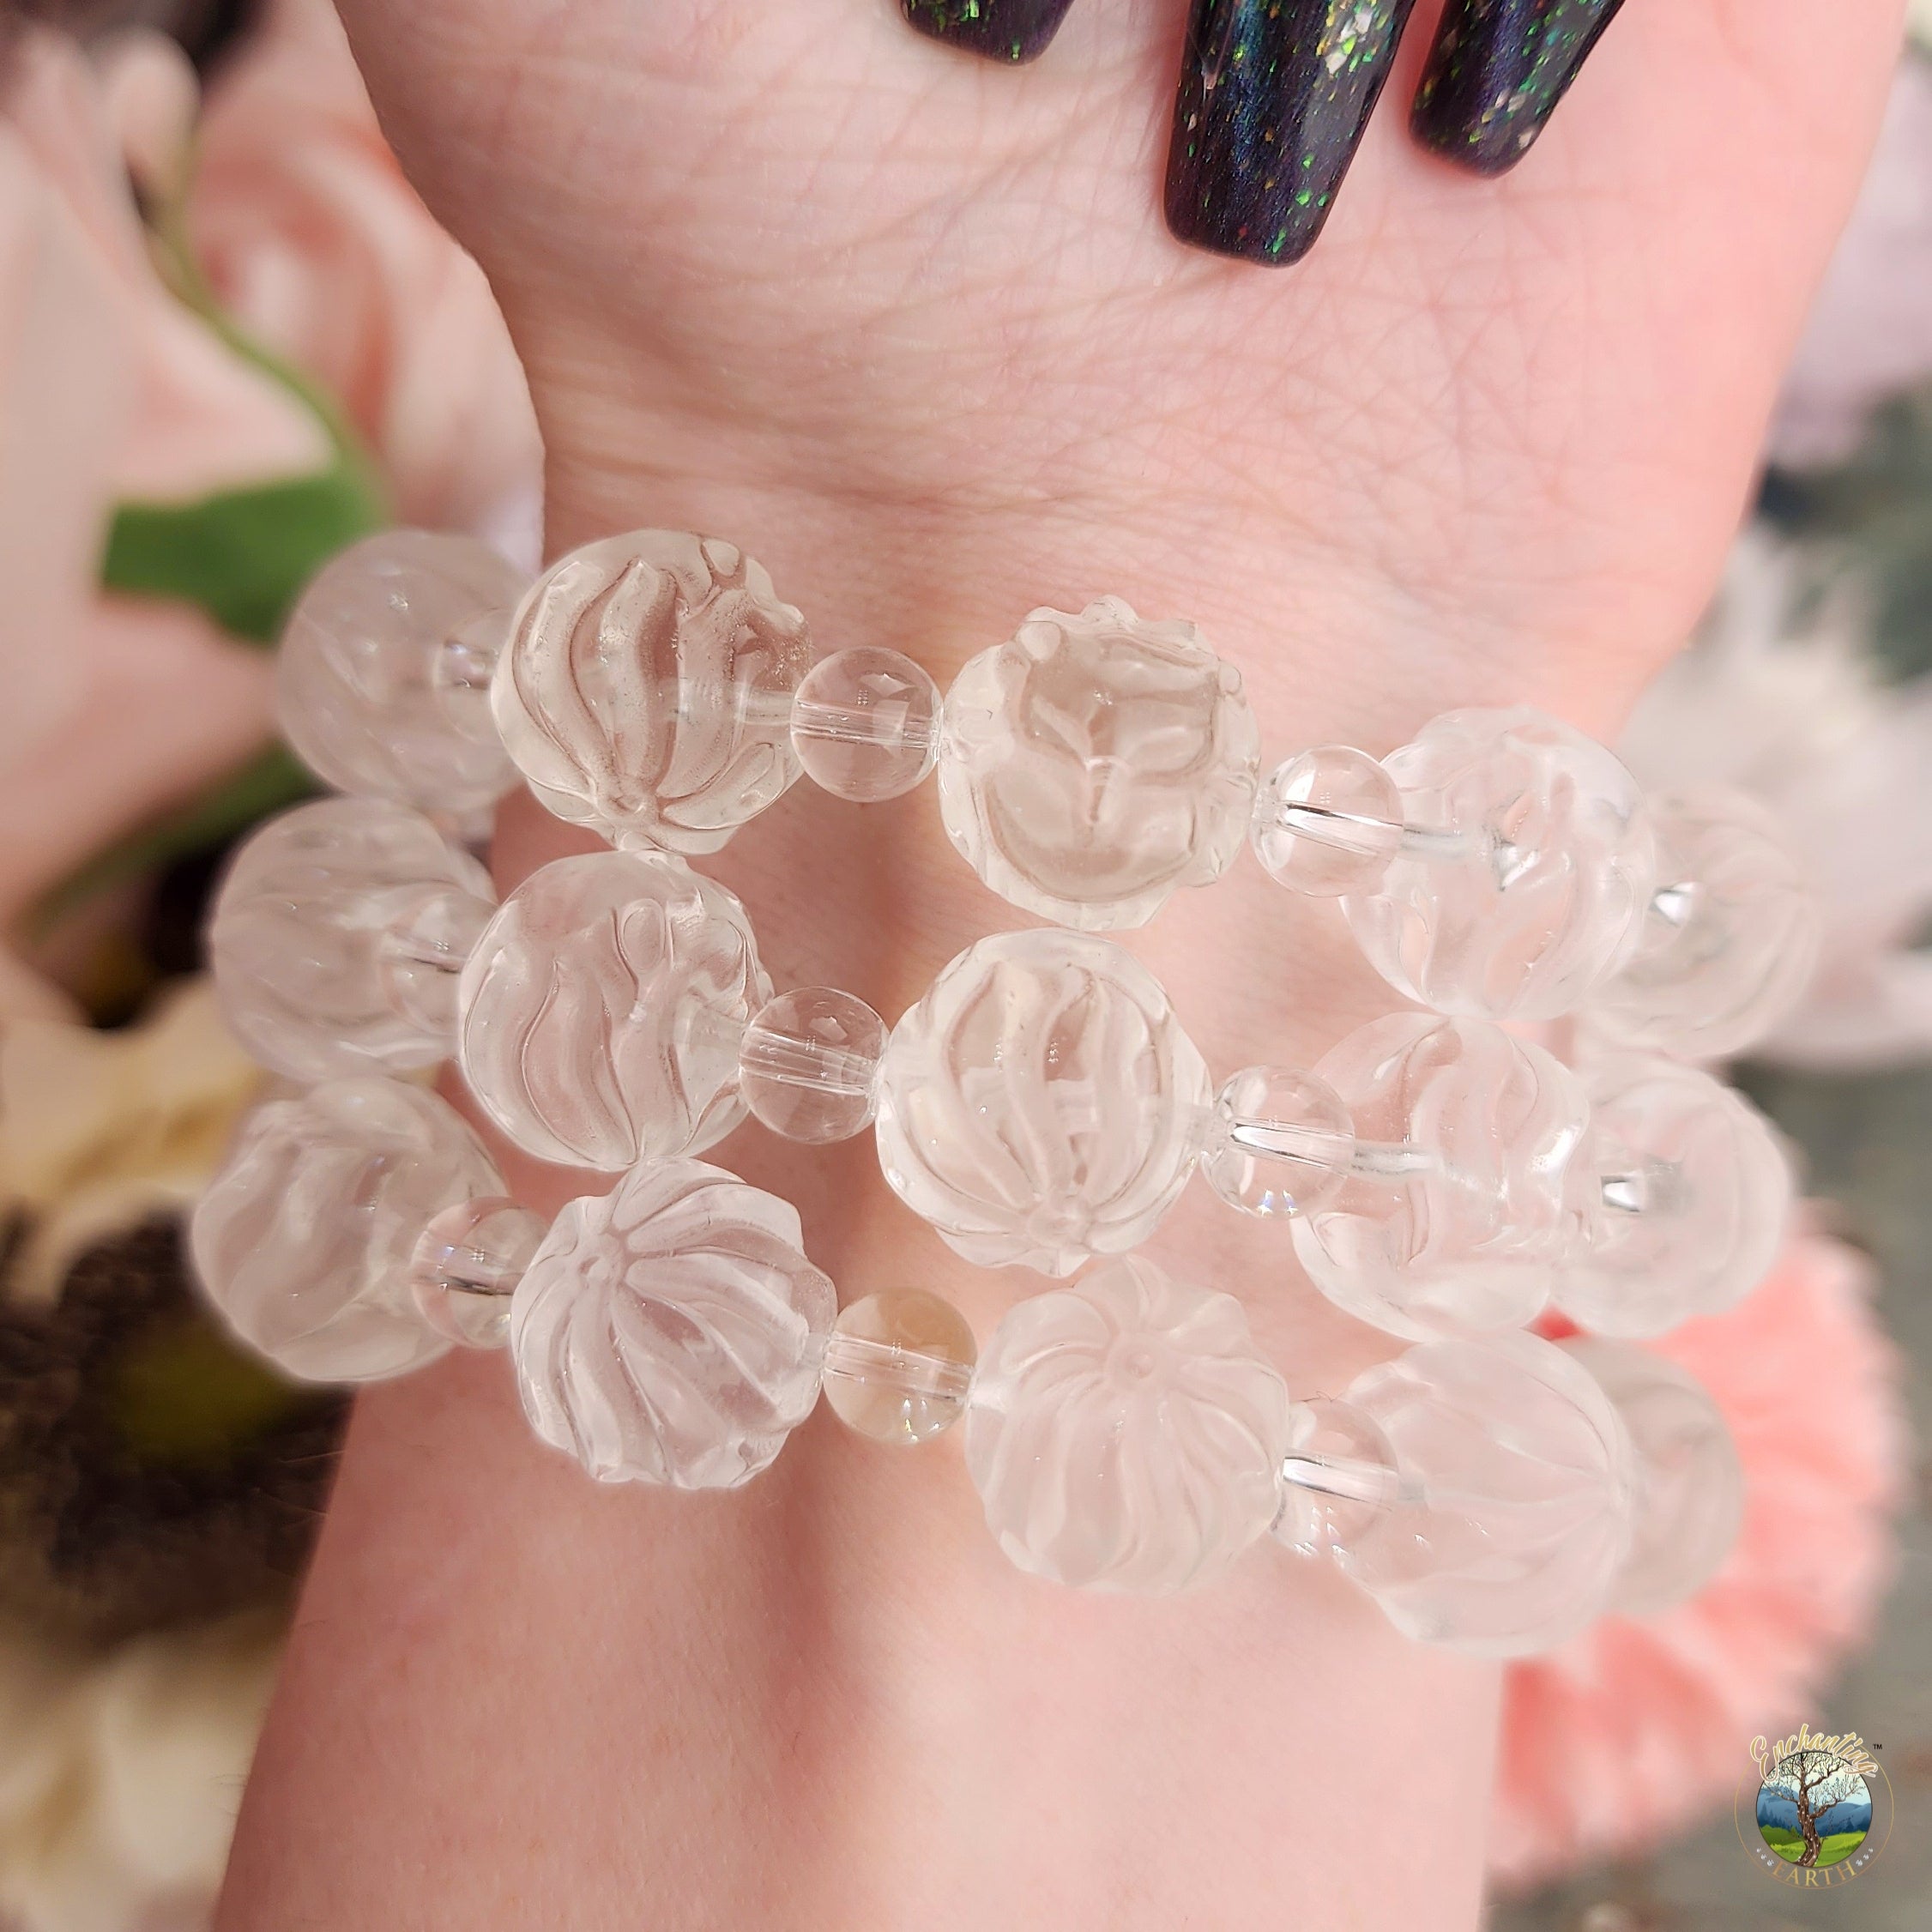 Clear Quartz Ninetails Bracelet for Healing, Manifesting and Setting Intentions